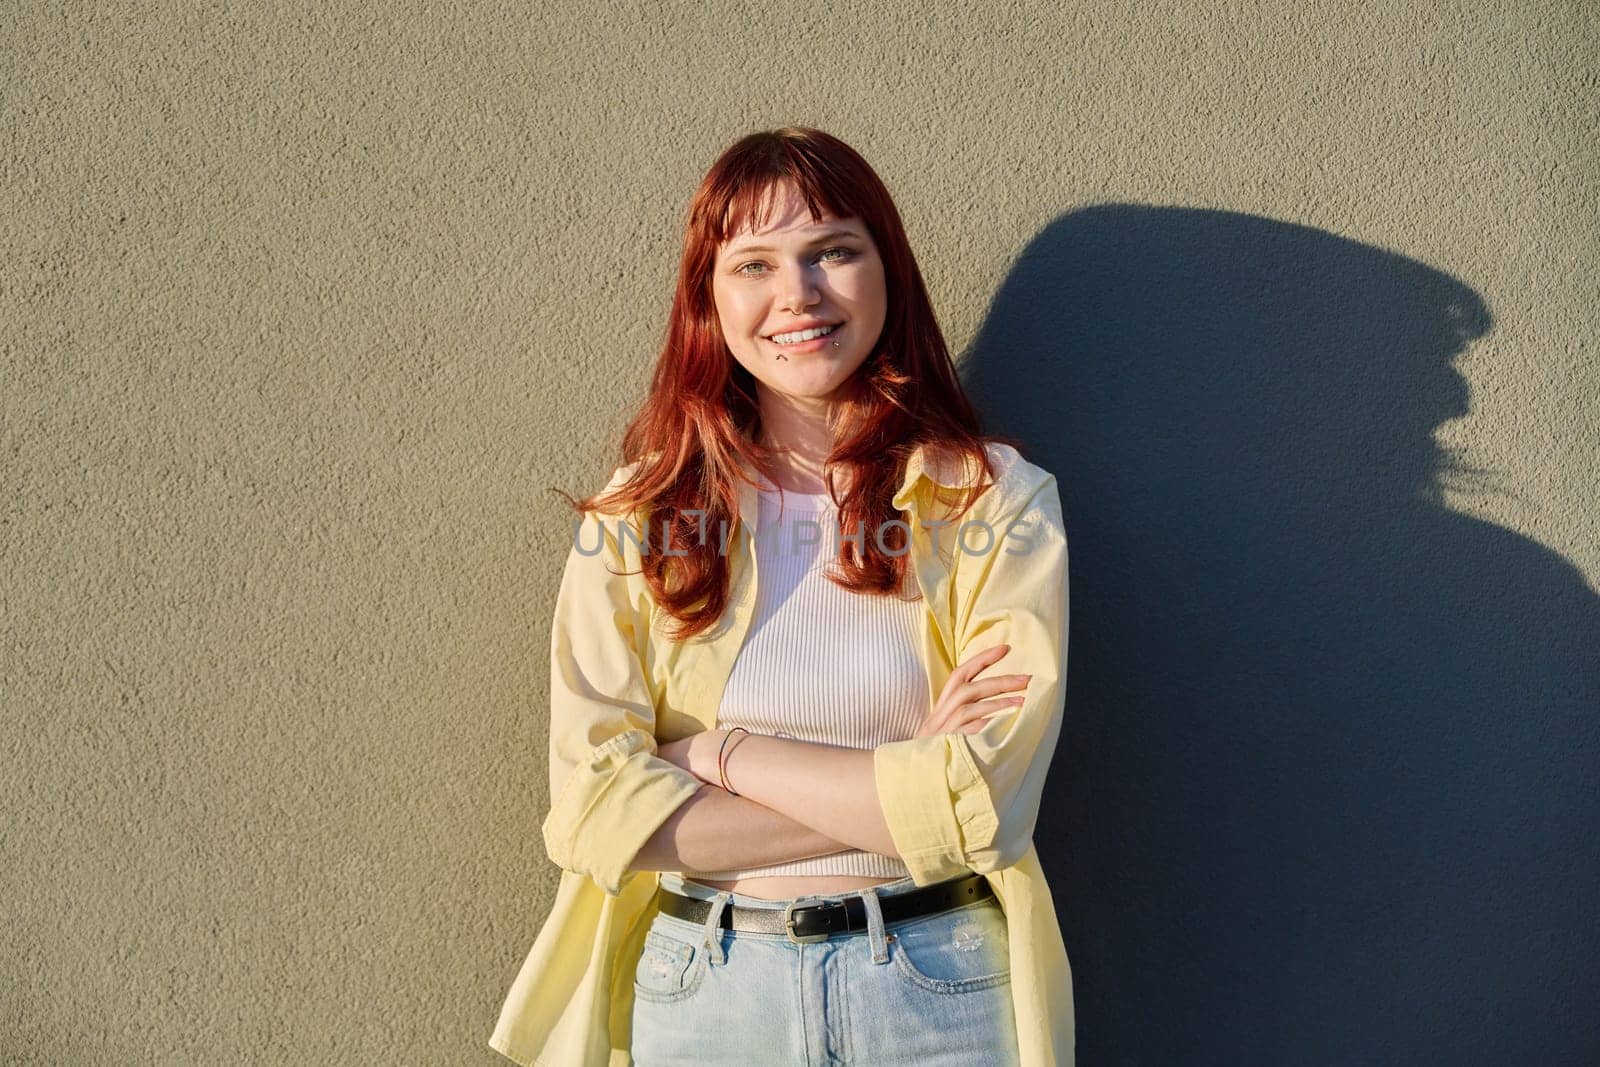 Outdoor portrait of happy confident young hipster female with red hair facial piercing looking at camera with crossed arms sunny gray wall background. Beauty, youth, fashion, joy, happiness, lifestyle